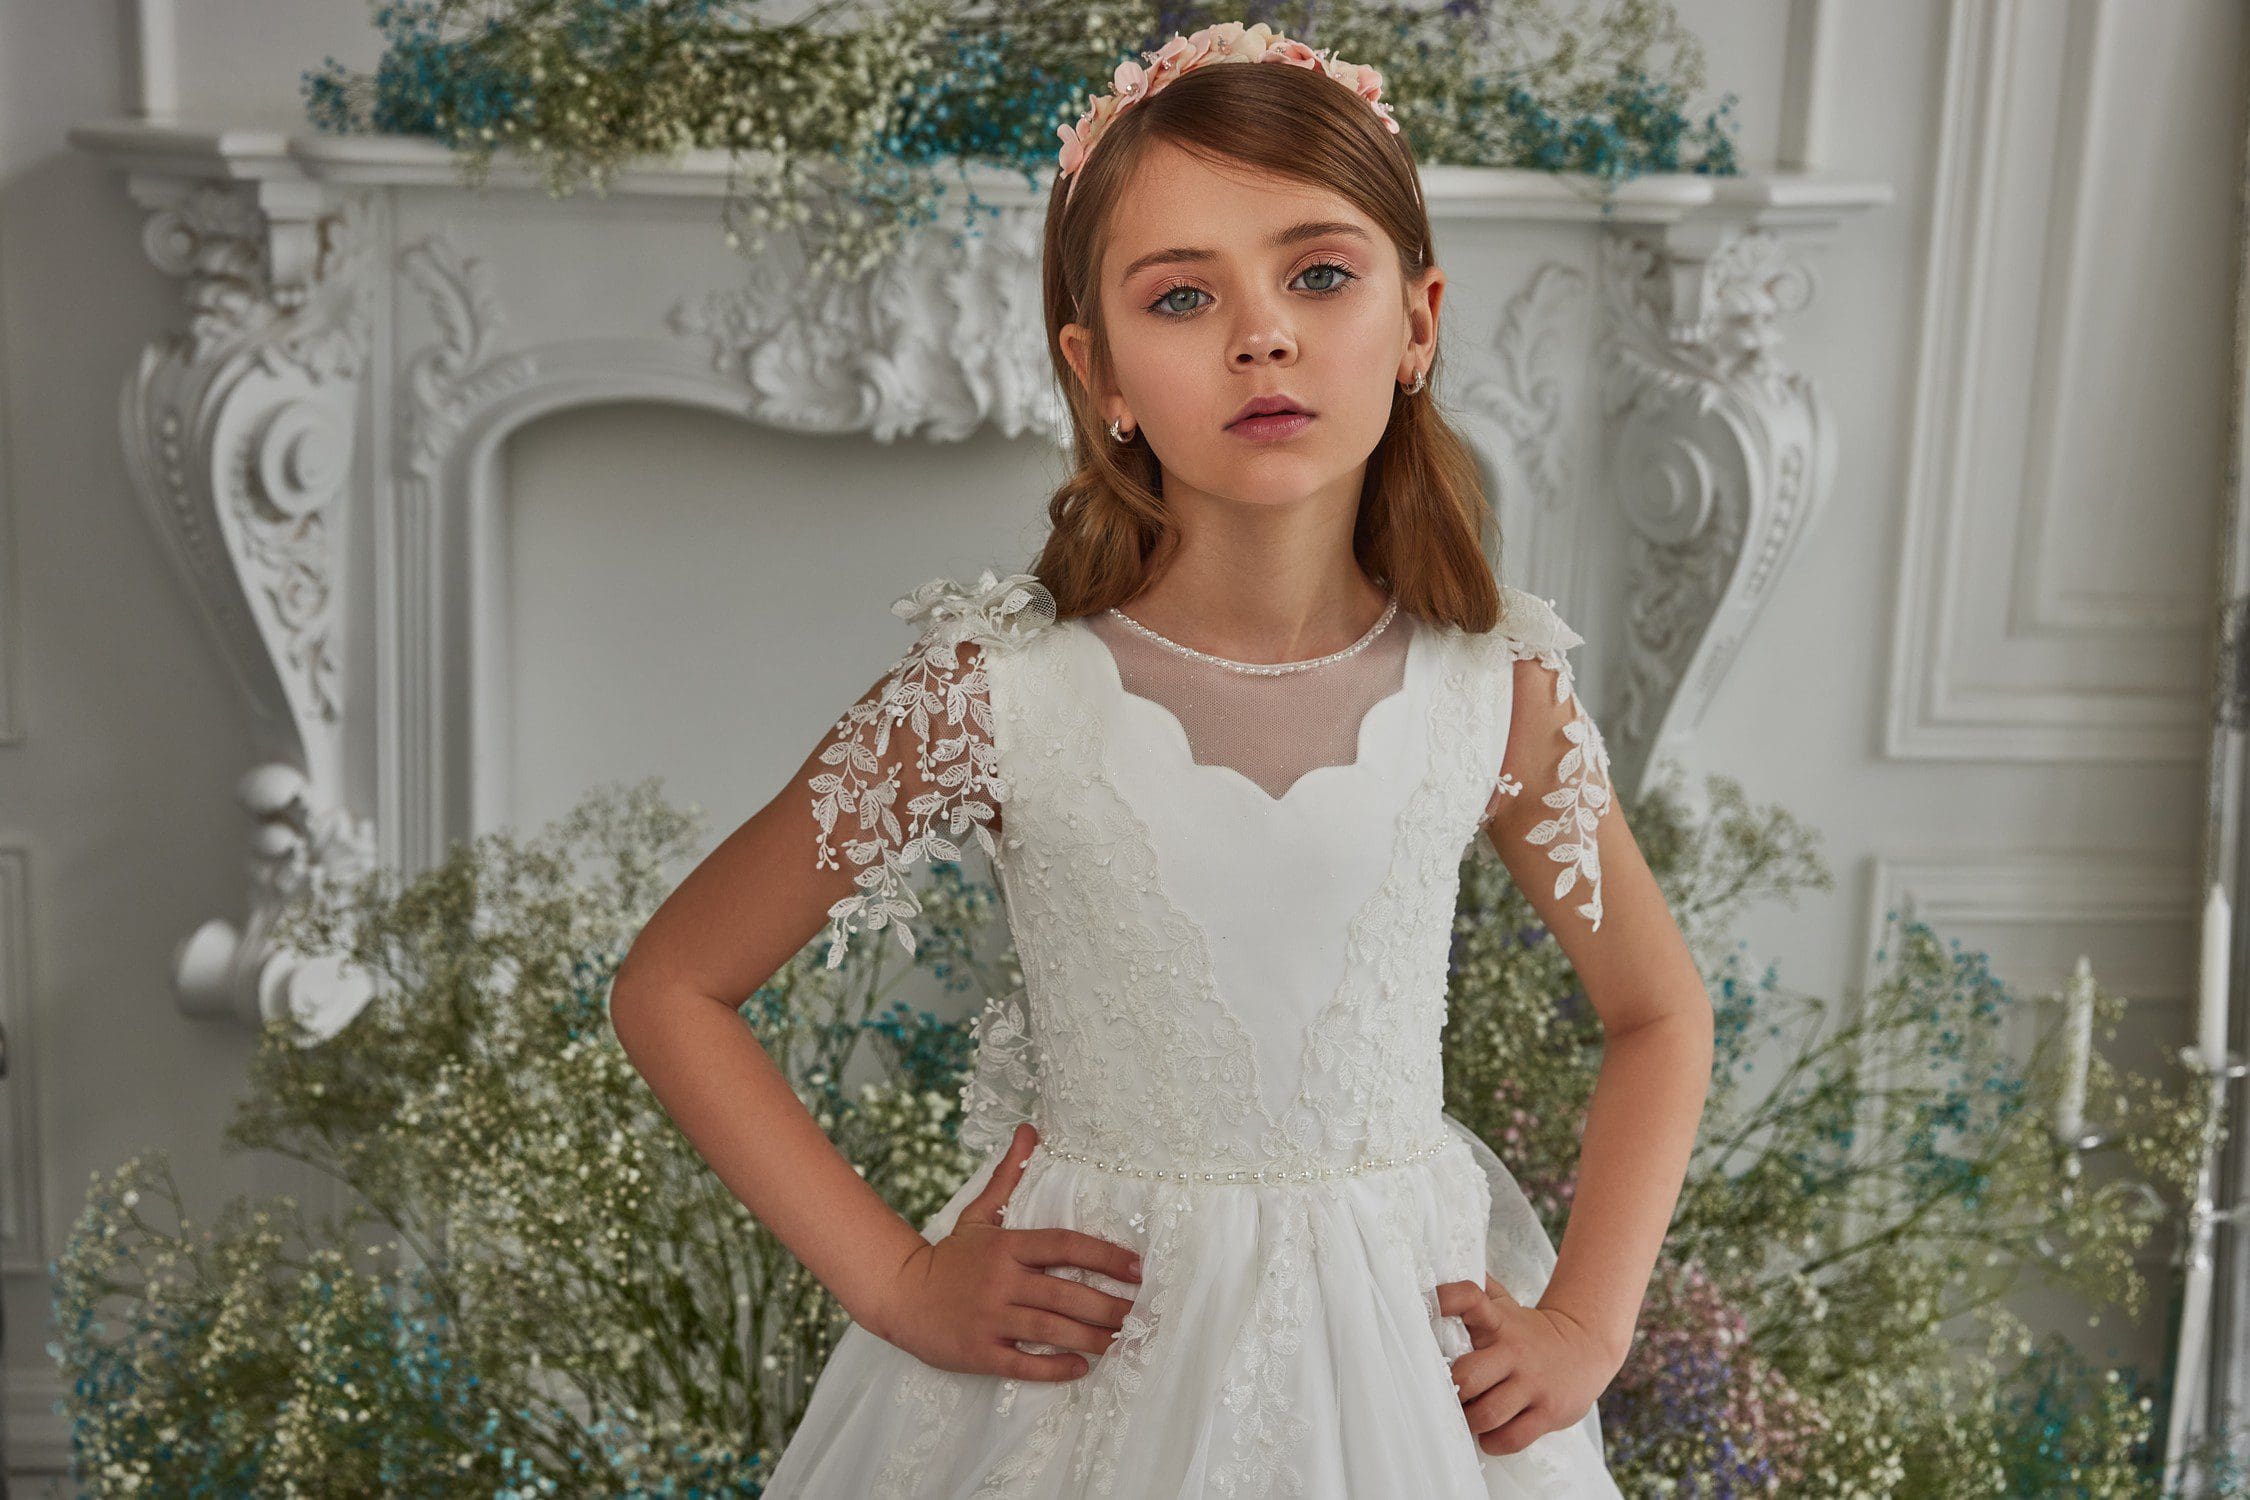 Girls Exclusive Dress For Communion at Quinn Harper Children's Occasion Wear in London